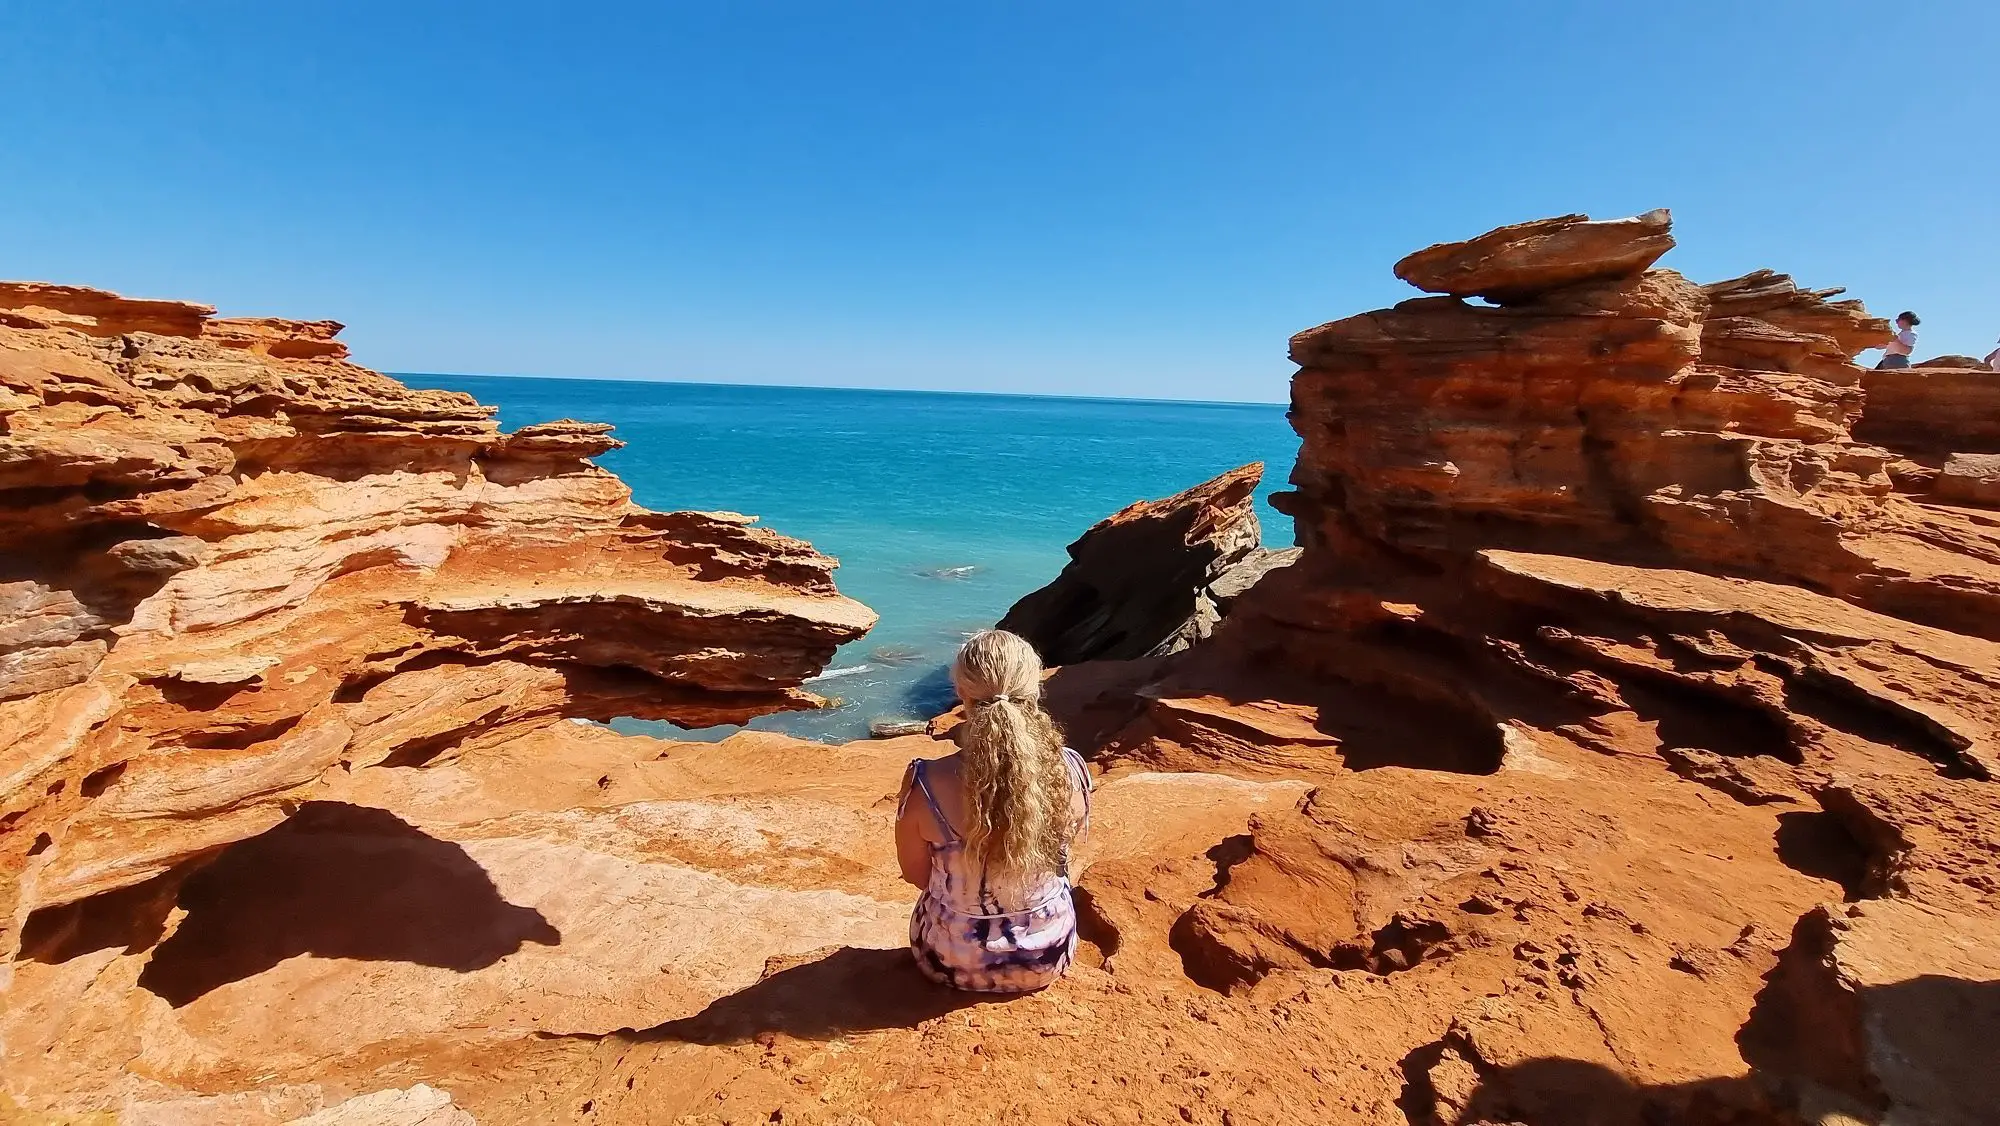 sitting on red rocks overlooking the ocean in Broome